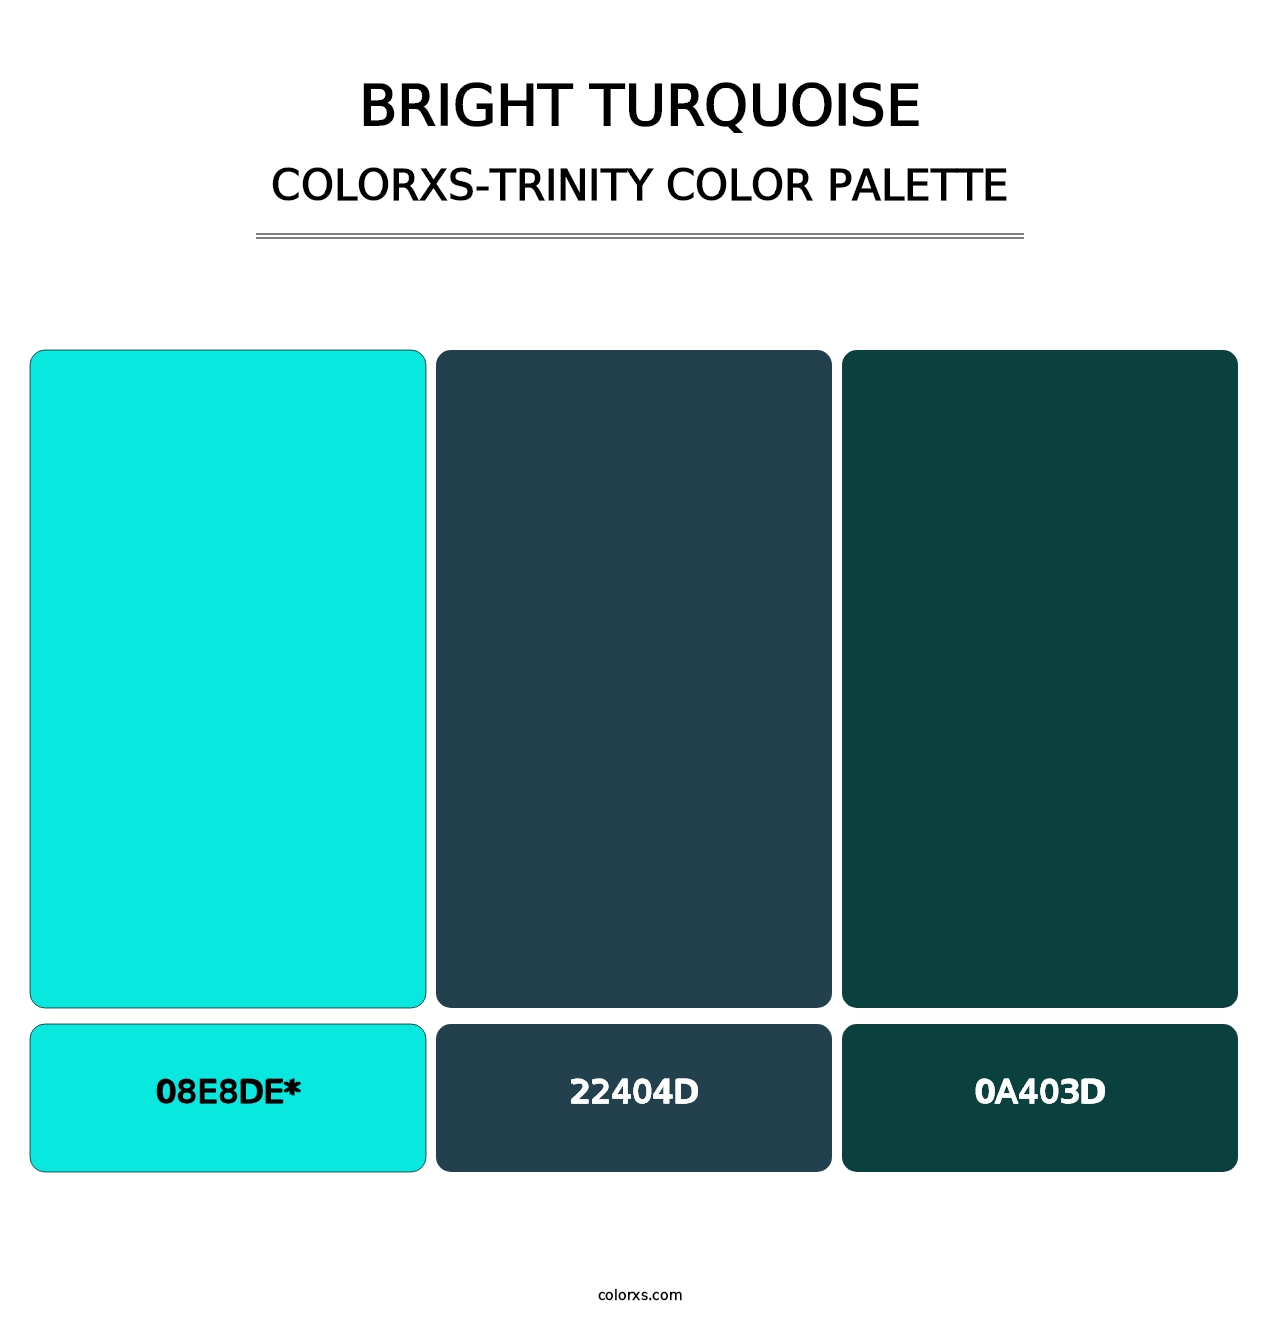 Bright Turquoise - Colorxs Trinity Palette